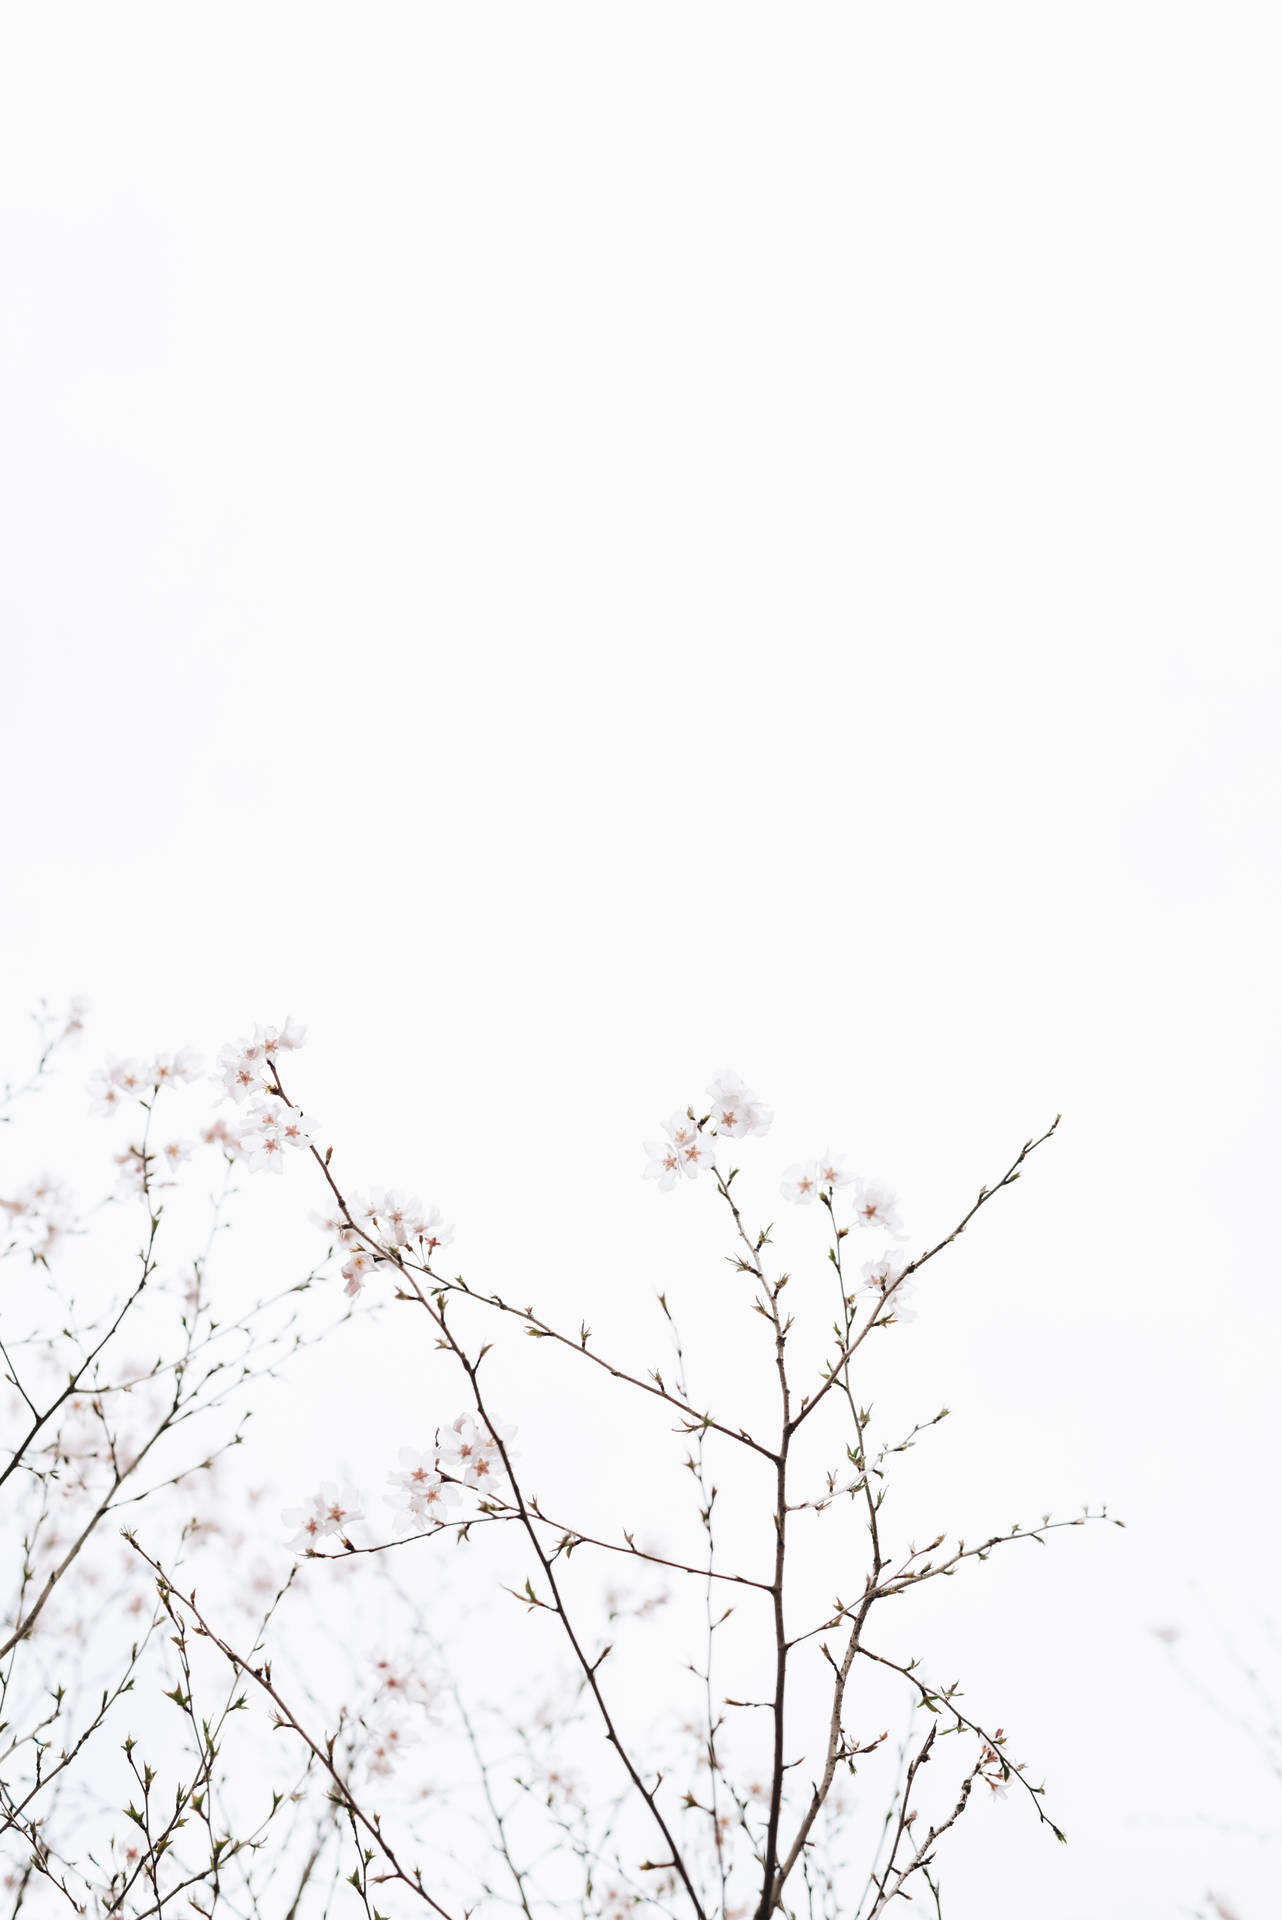 Graceful Cherry Blossoms Under a Blissful White Sky Wallpaper